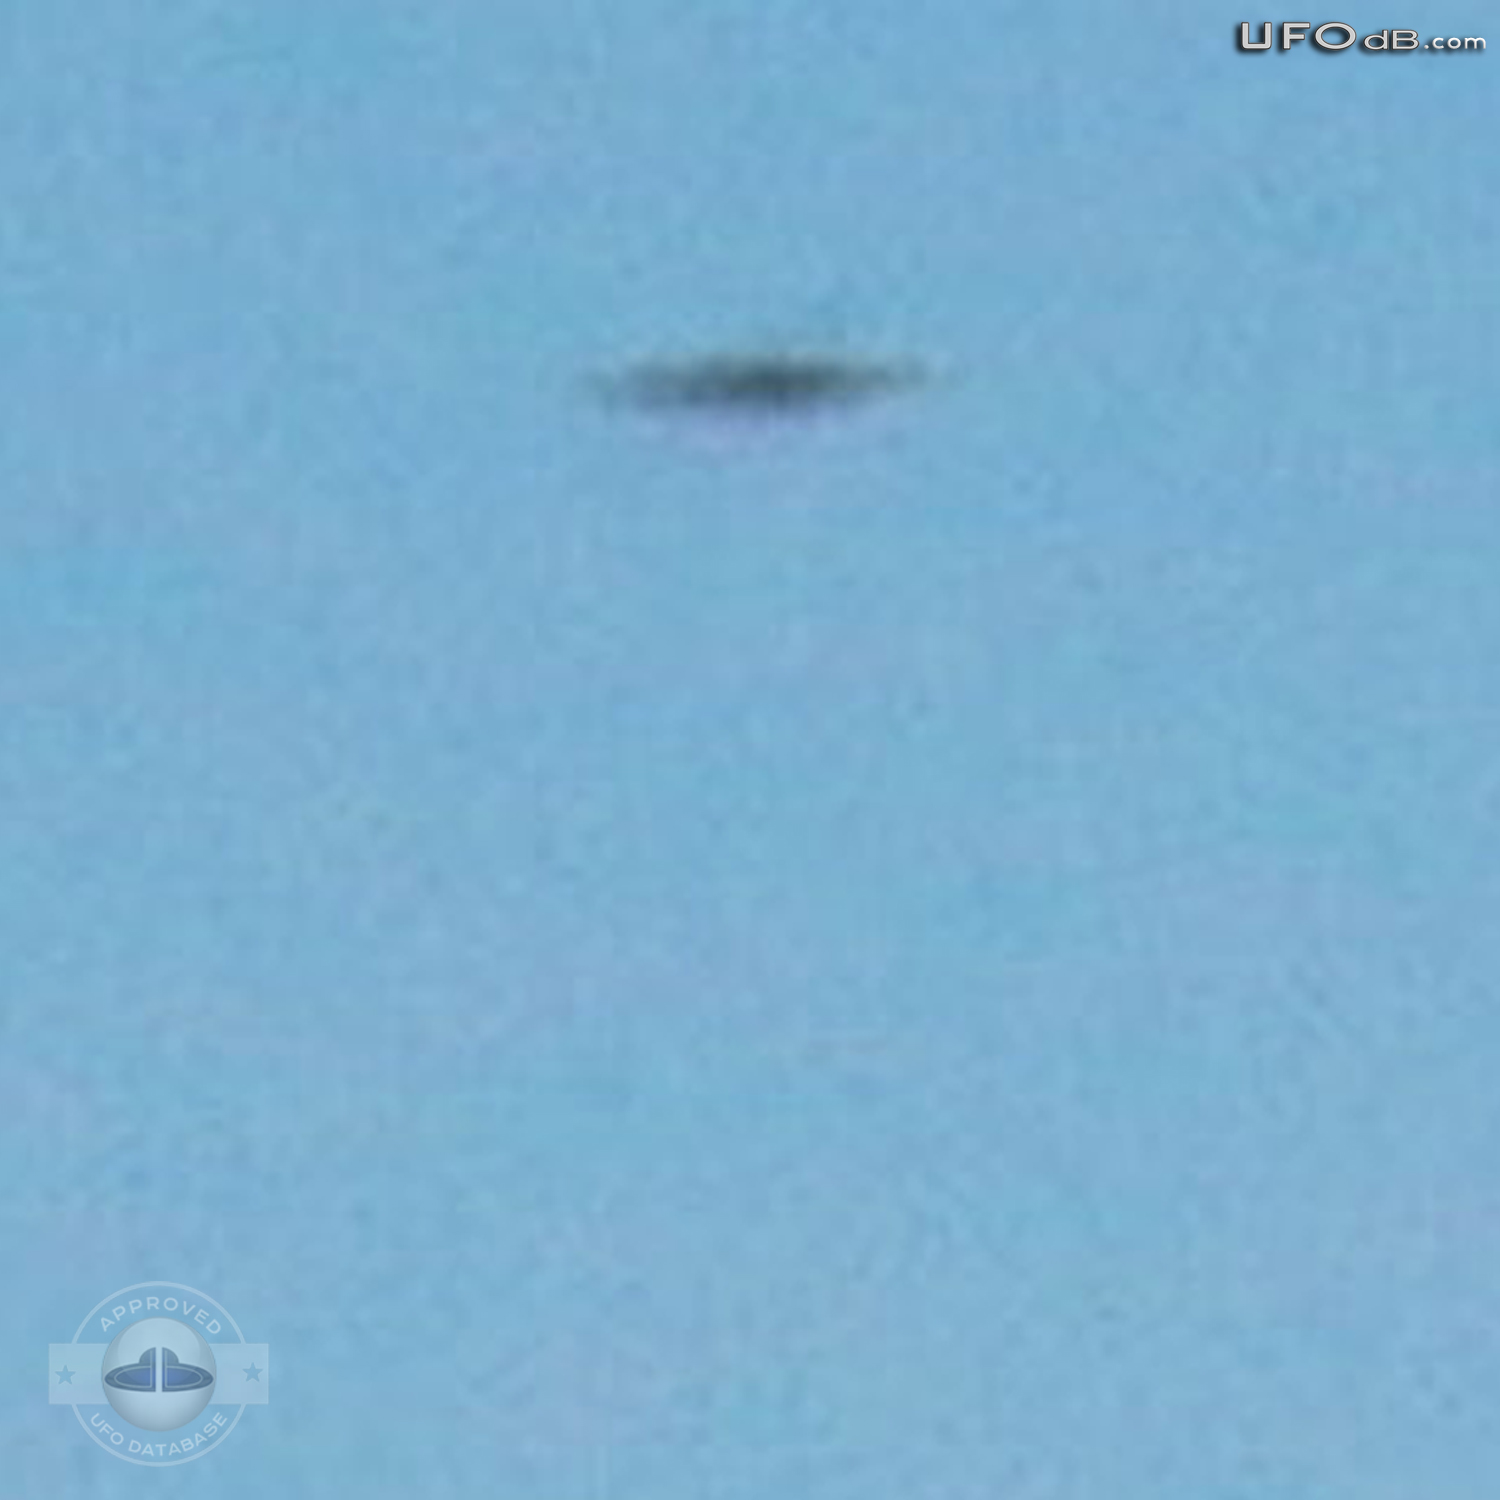 Lake Wosley Fisherman get a fast UFO on picture | Ontario, Canada 2011 UFO Picture #276-4